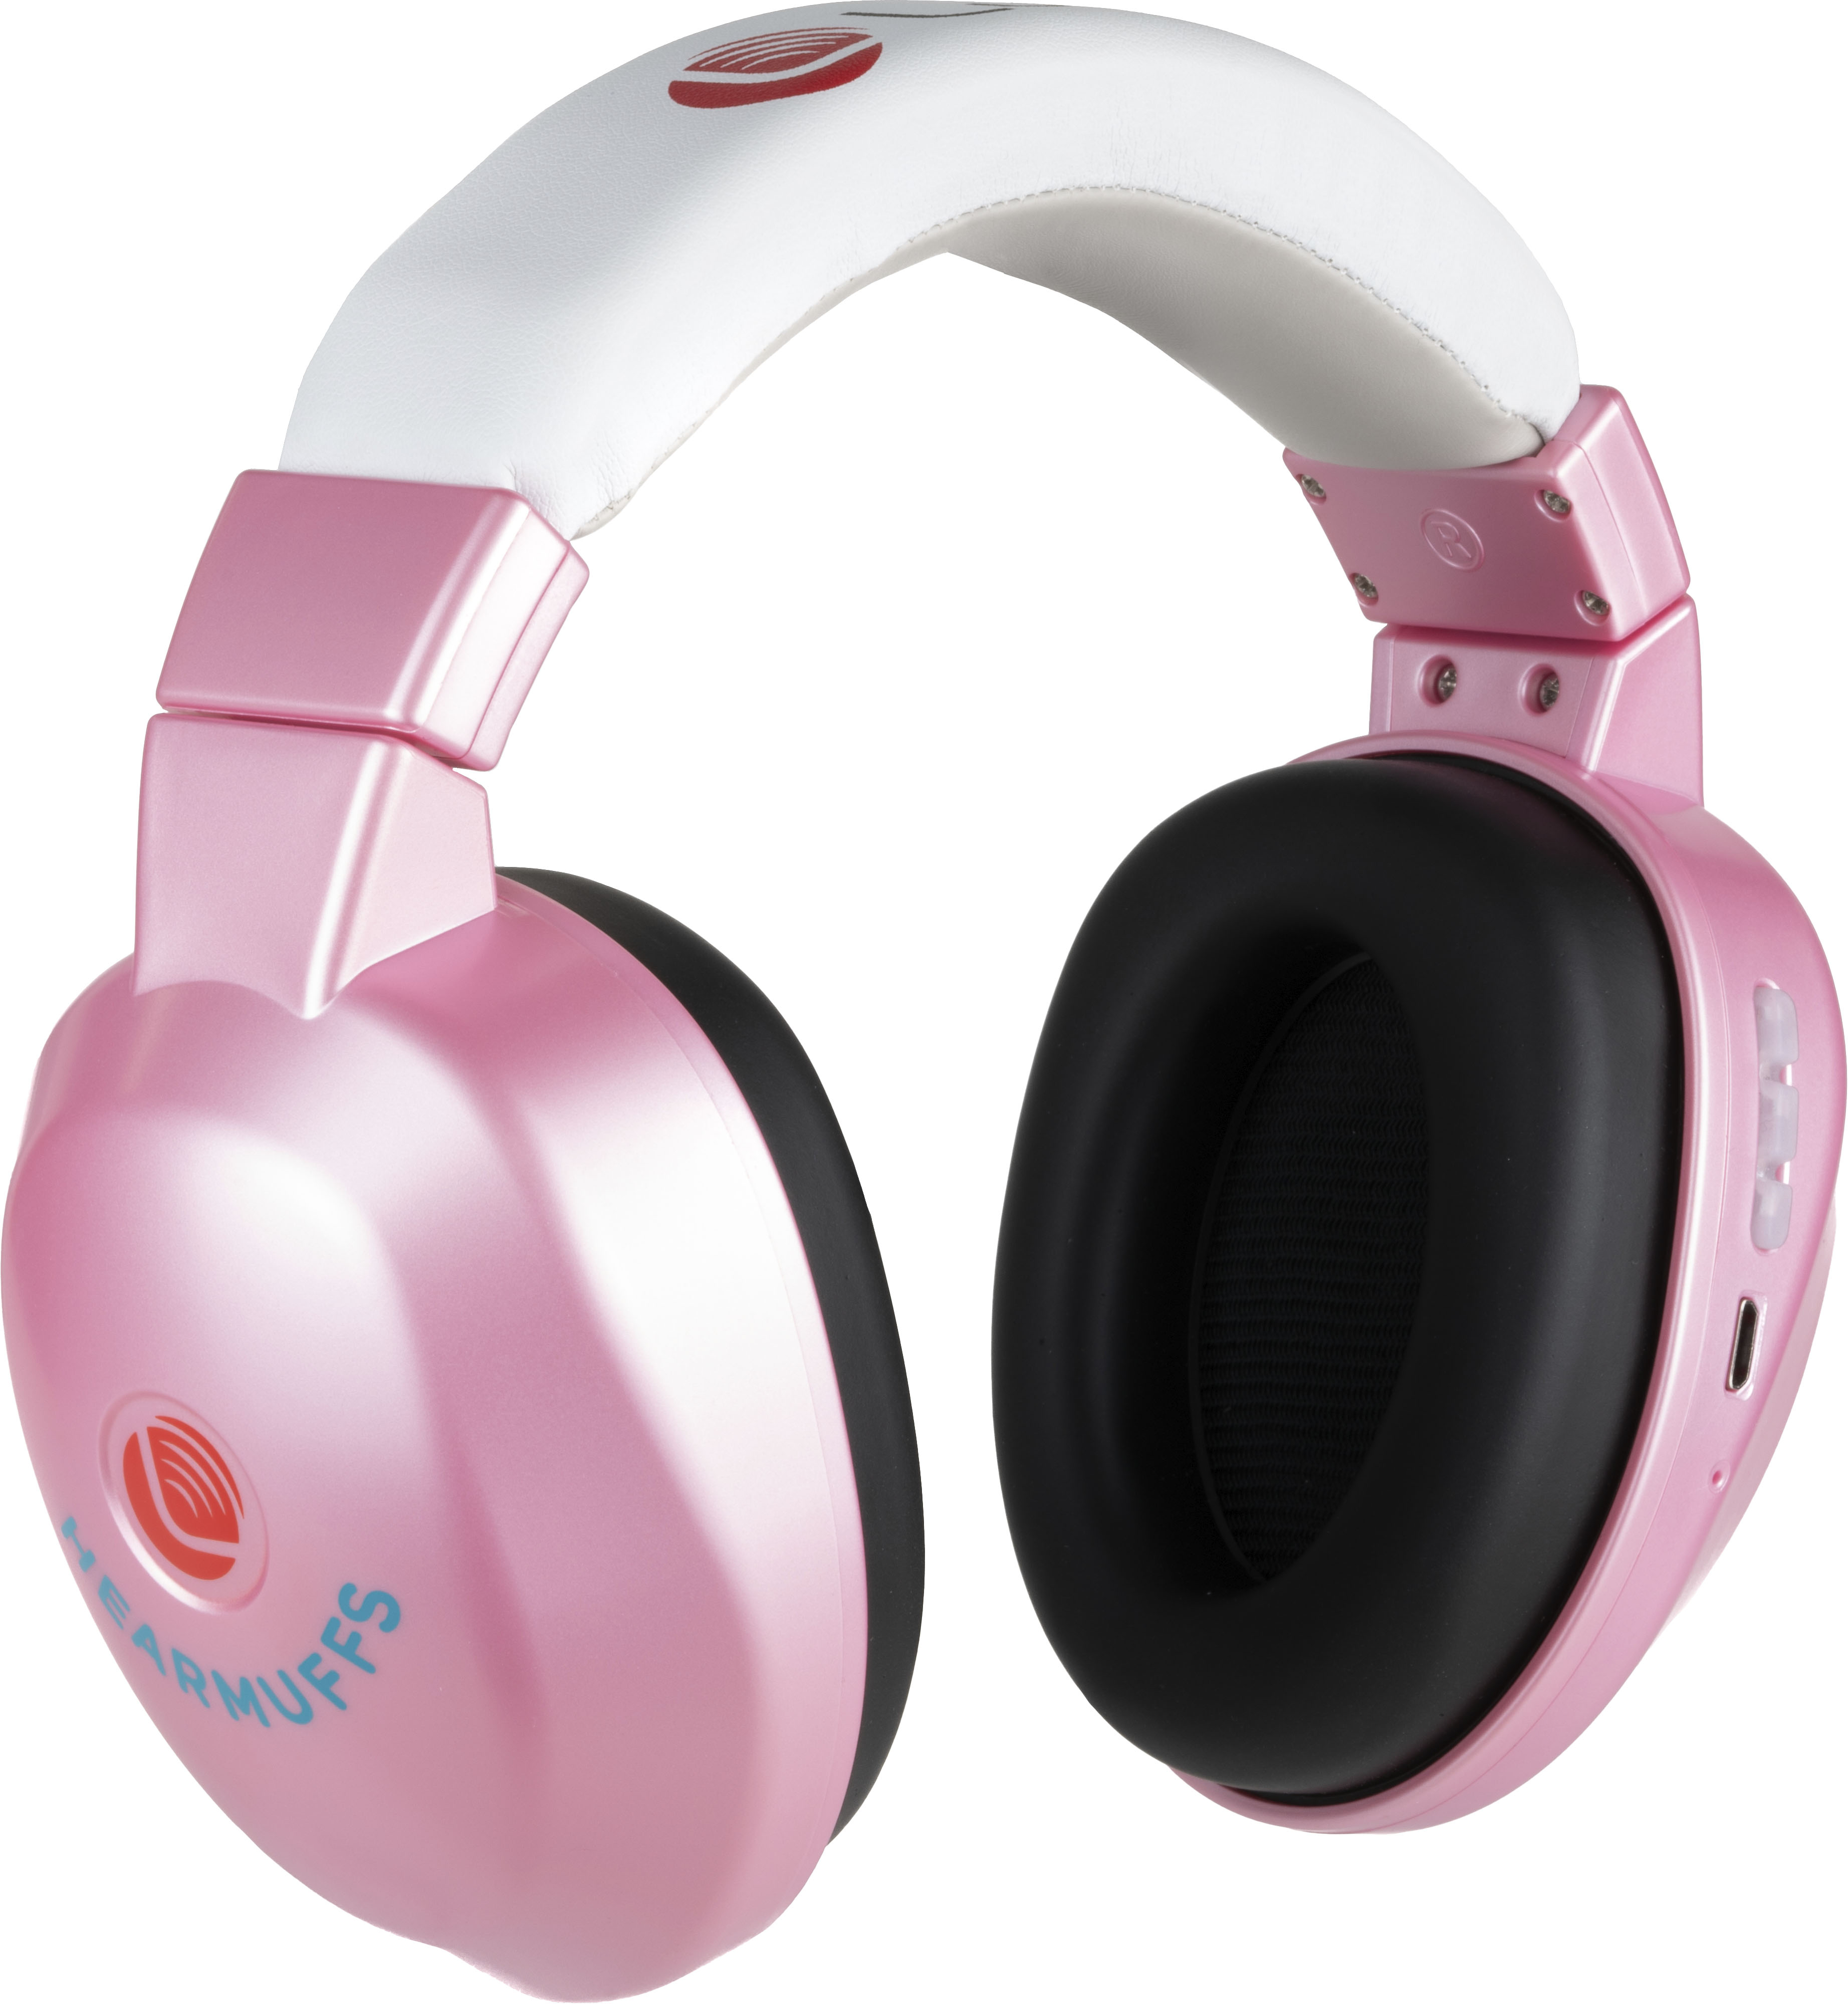 Angle View: Lucid Hearing - Bluetooth HearMuffs for Infant/Toddler - Hearing Protection for Infant/Toddler 0-4 Years Old - PINK